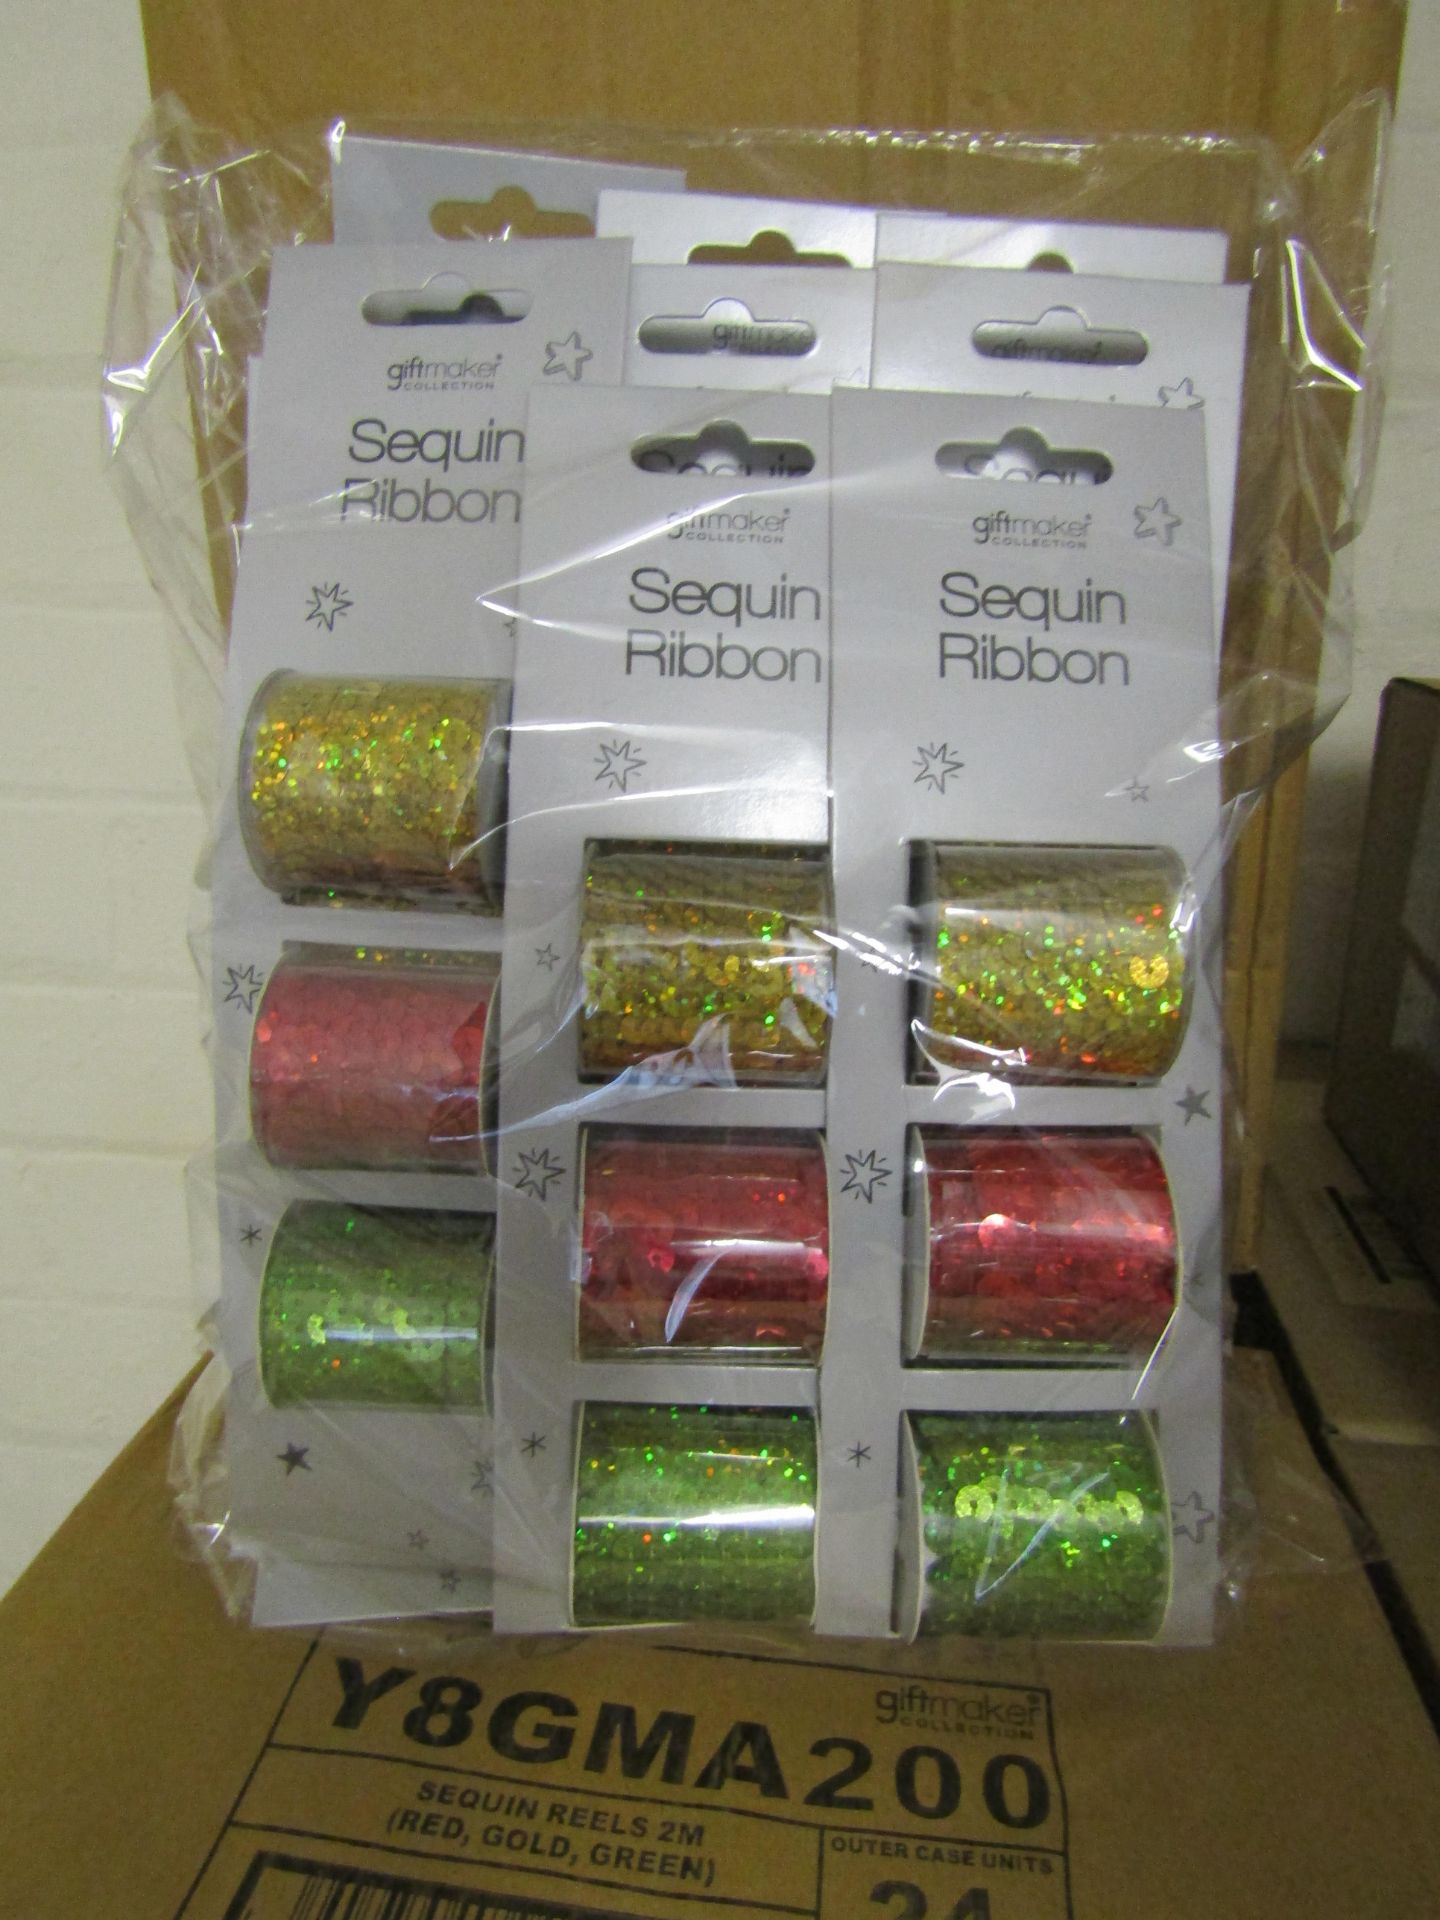 Box Of 24x Giftmaker Sequin Reels,2m, Red, Gold, Green, Unchecked & Packaged.